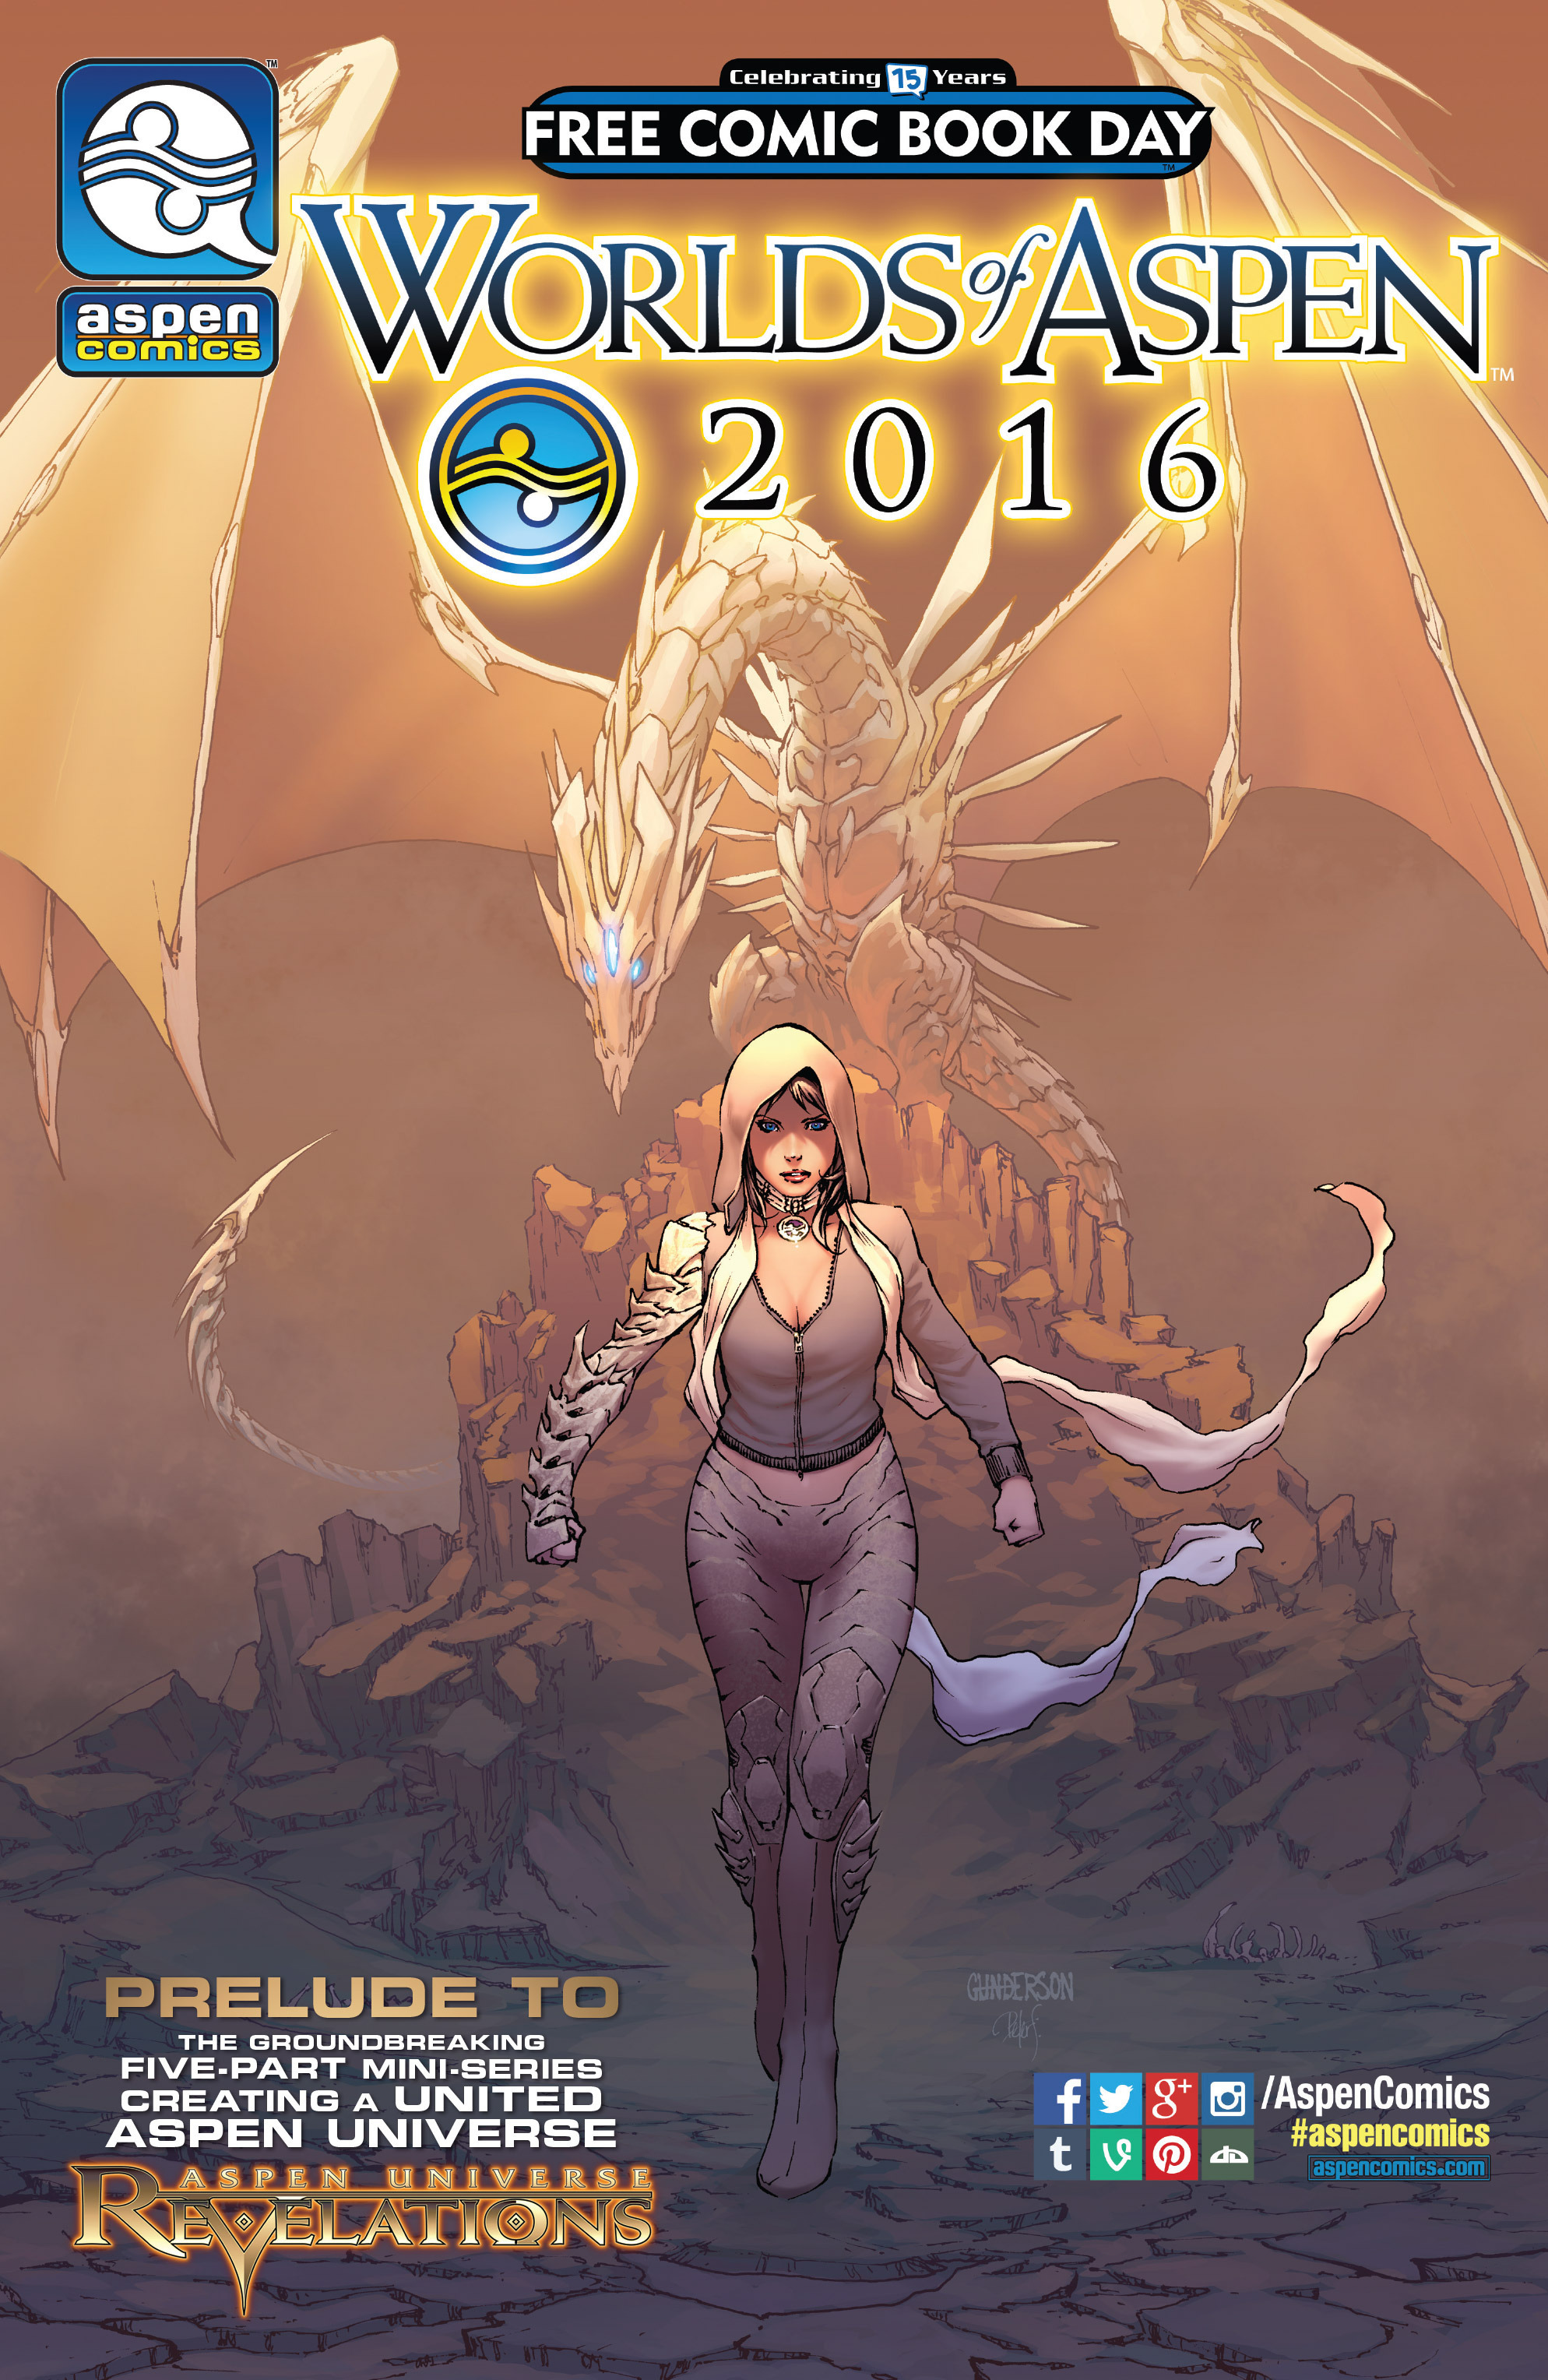 Read online Free Comic Book Day 2016 comic -  Issue # Worlds of Aspen - 1